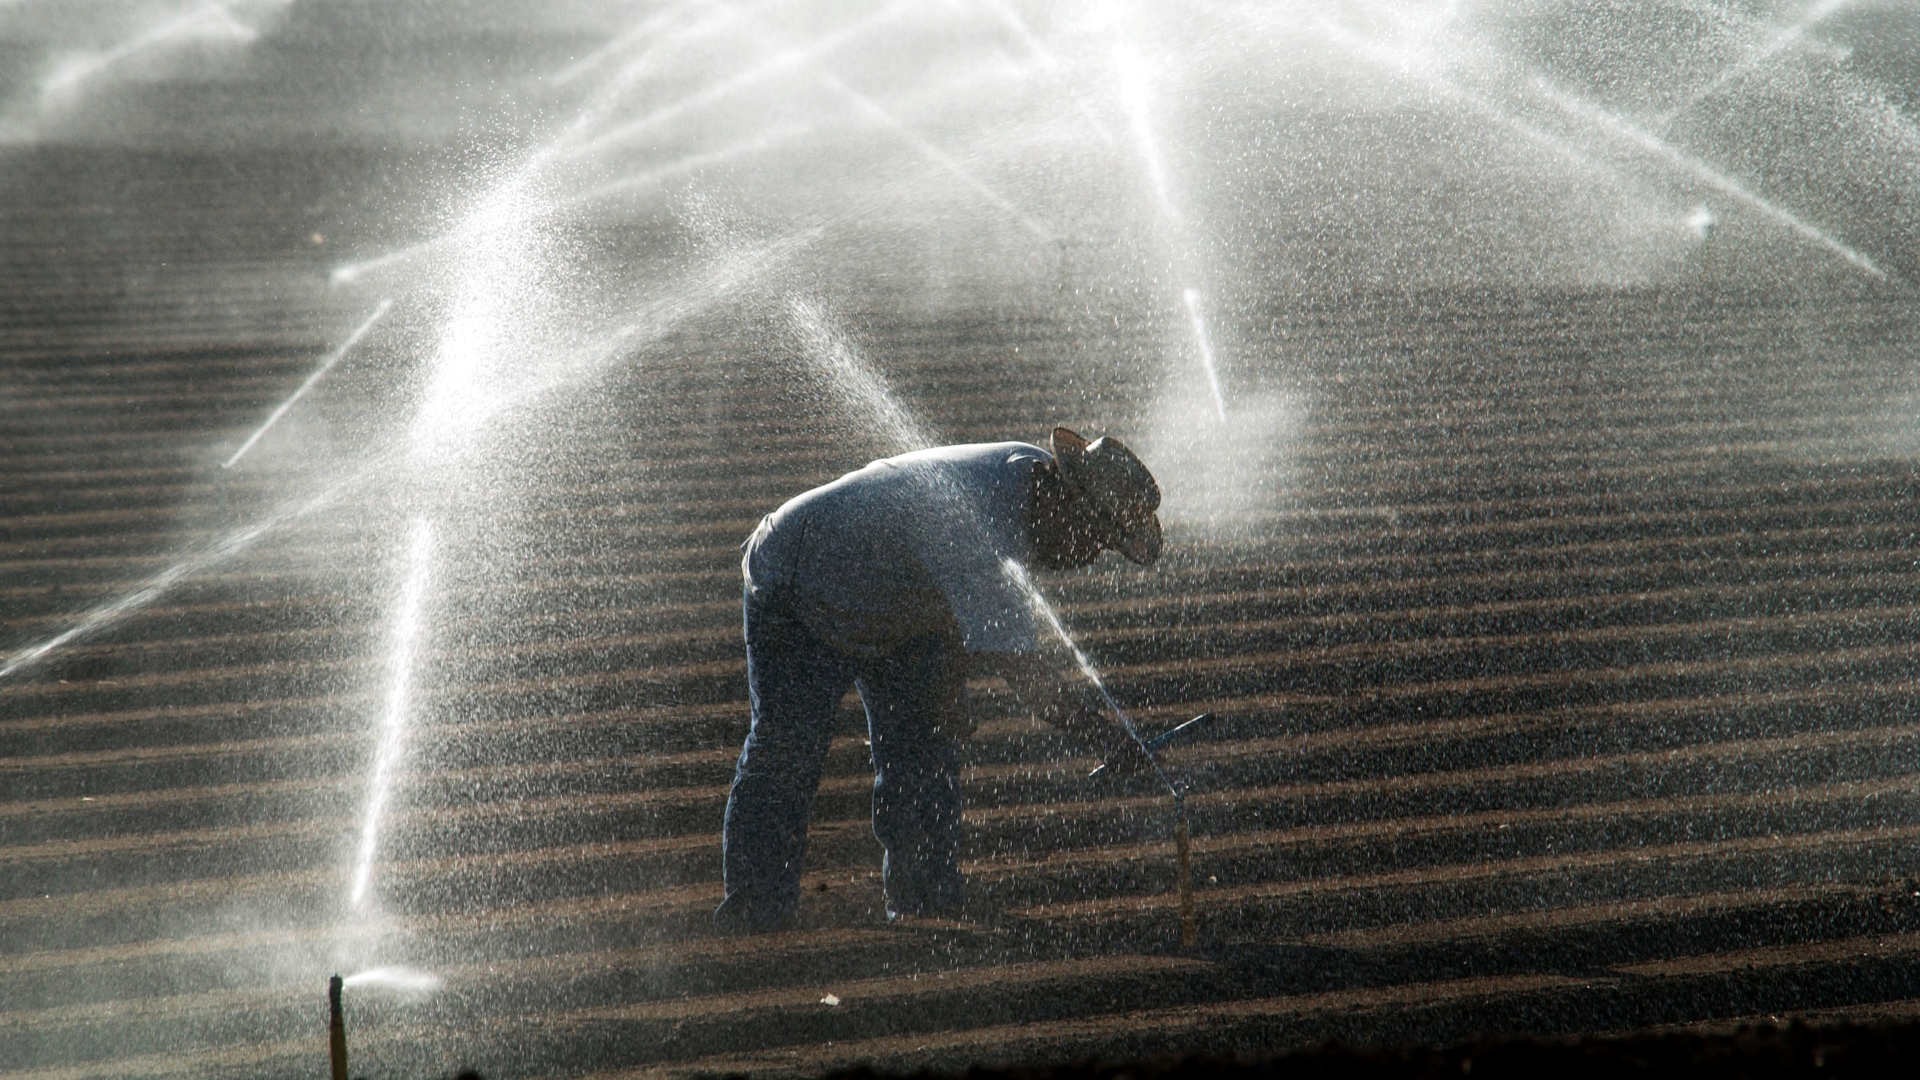 A farm worker adjusts sprinkler heads spraying water that comes from the Colorado River near El Centro, California.